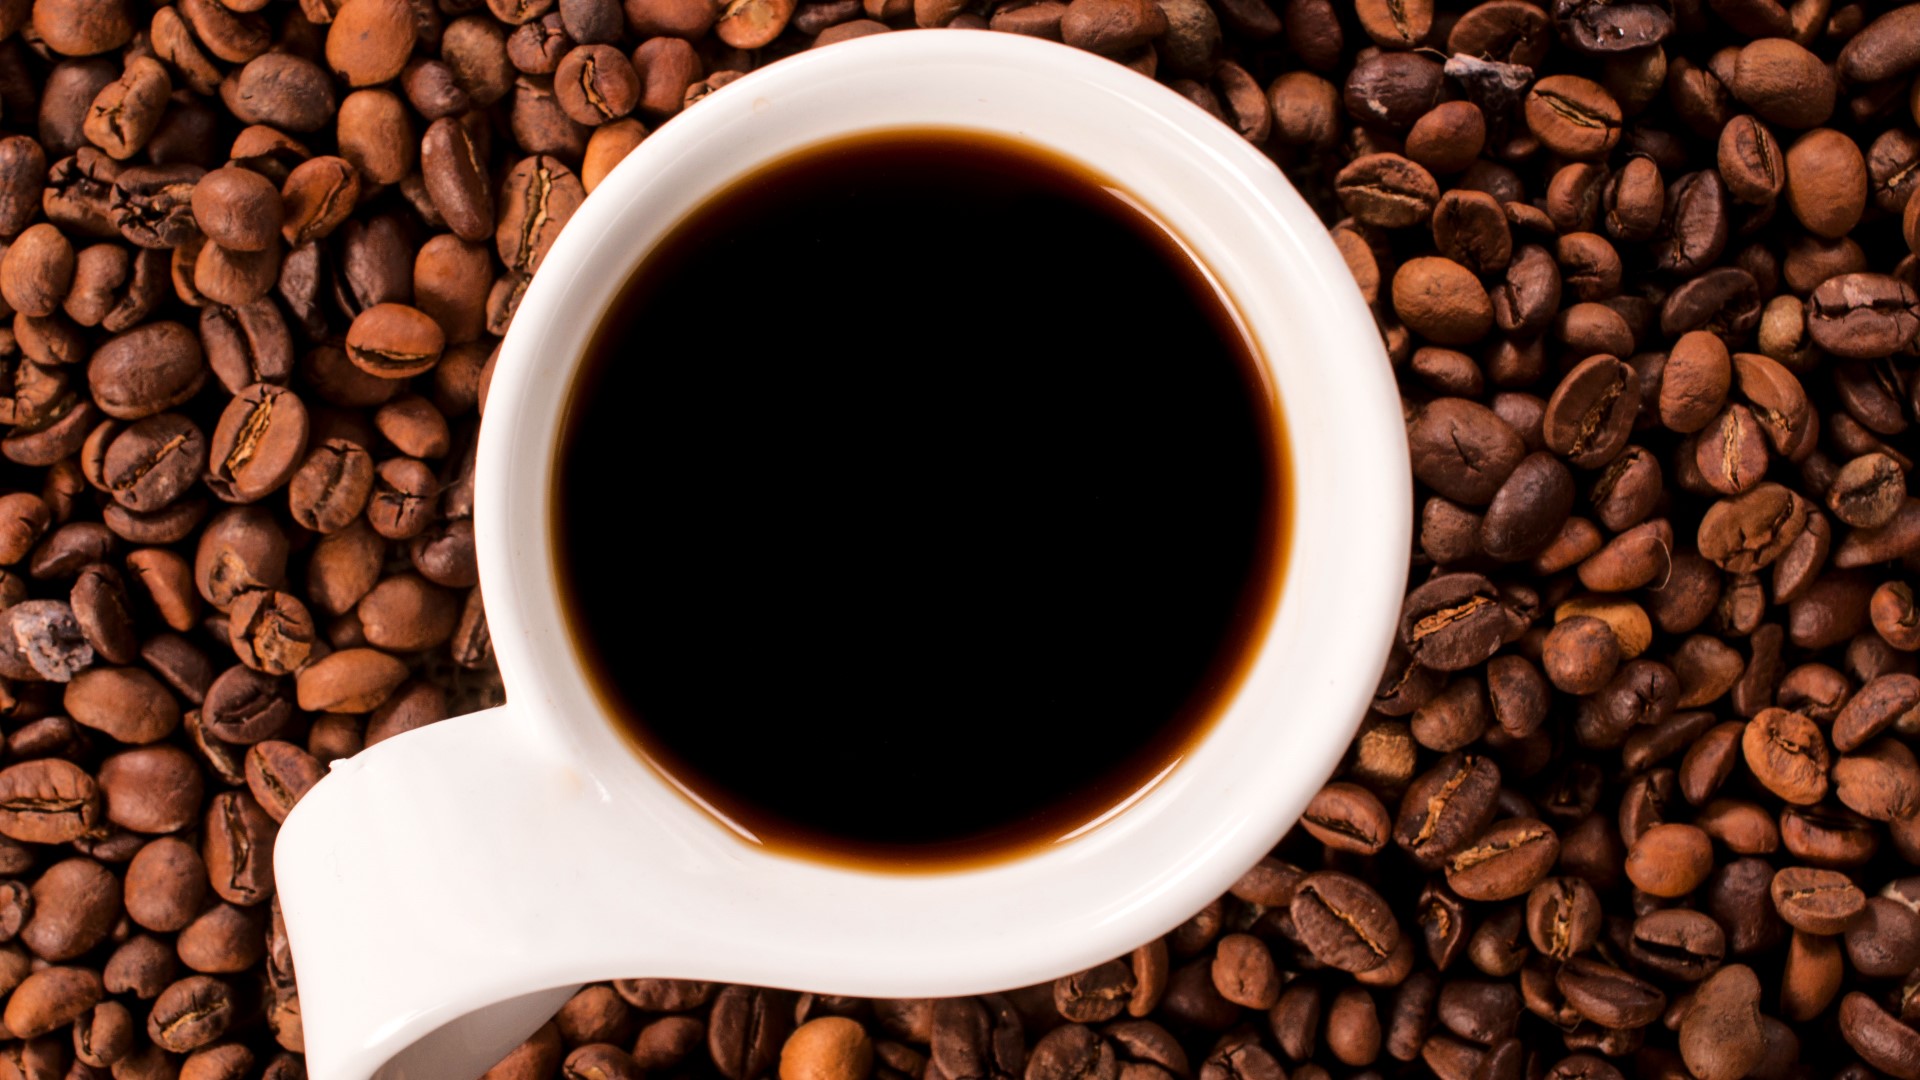 National Coffee Day is celebrated on Sept. 29. Here's where to find the best deals.